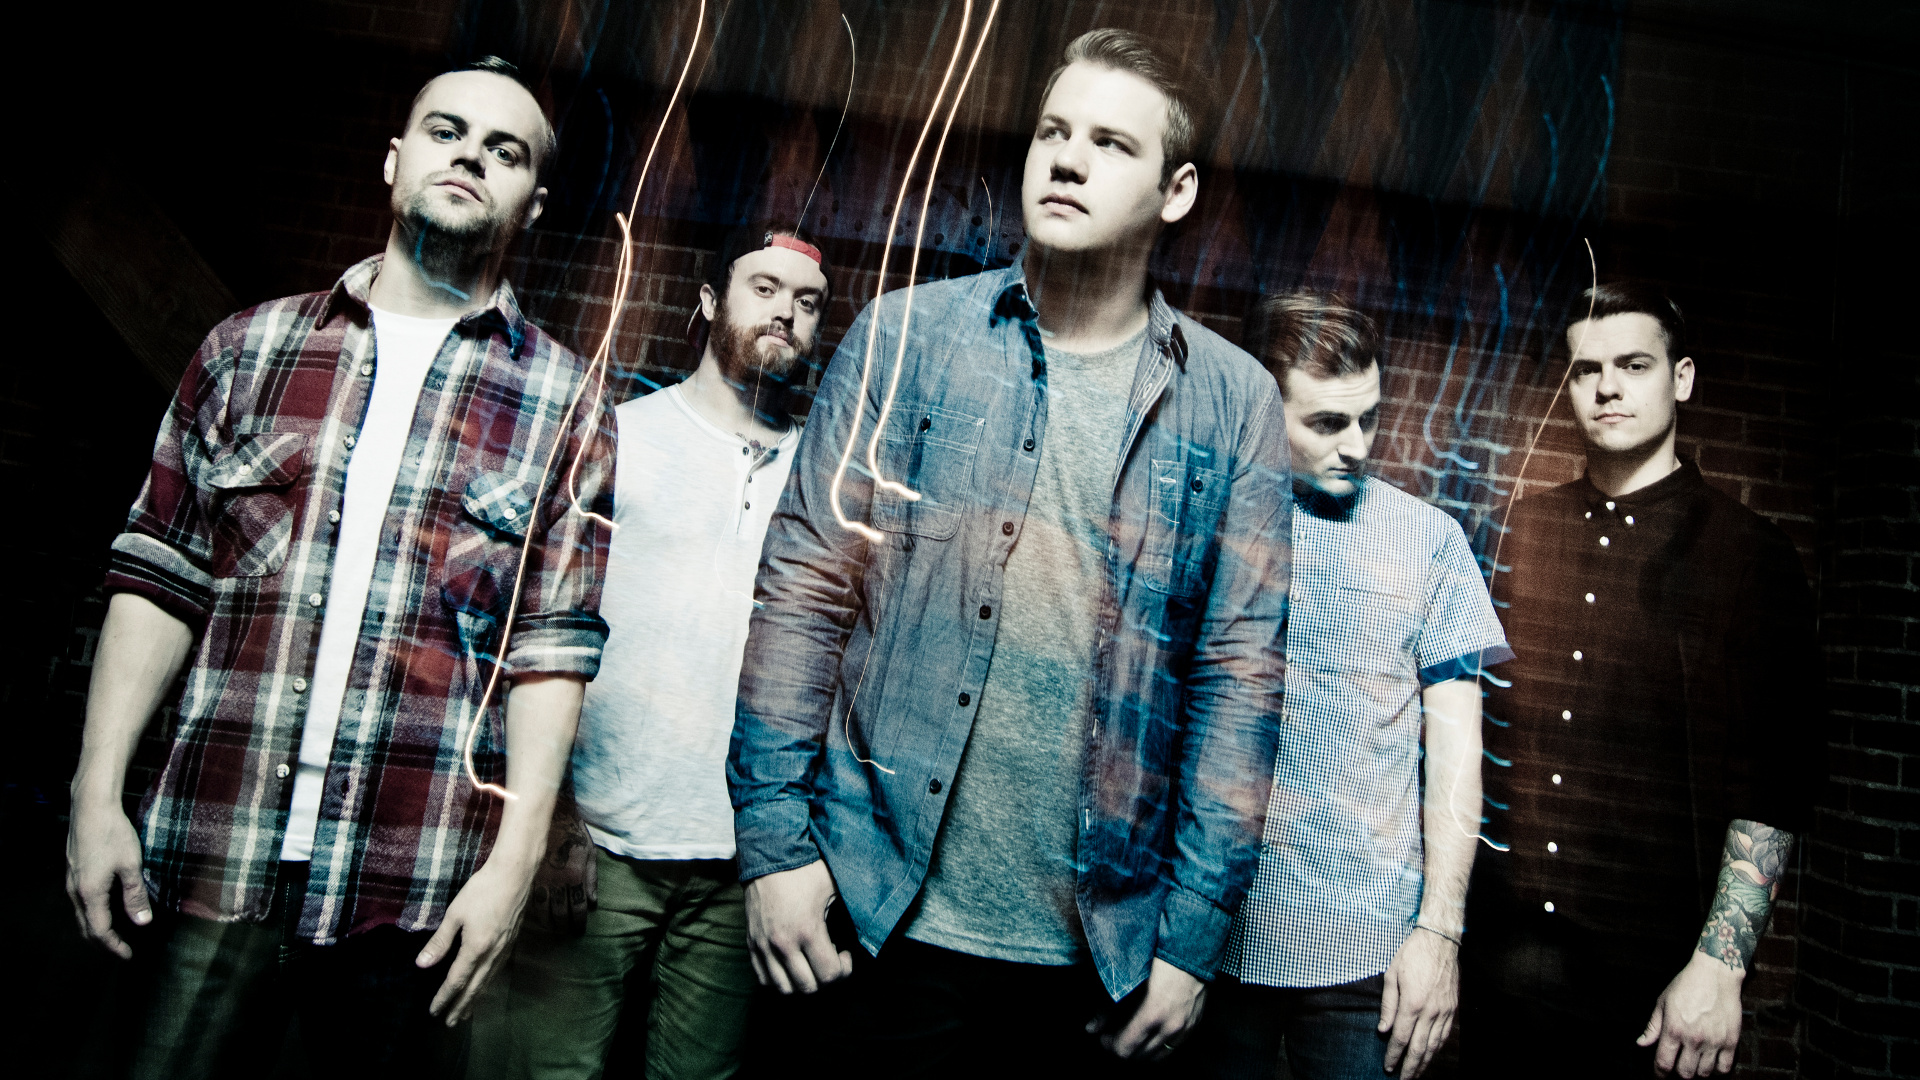 Free download Beartooth Music fanart fanarttv [1920x1080] for your